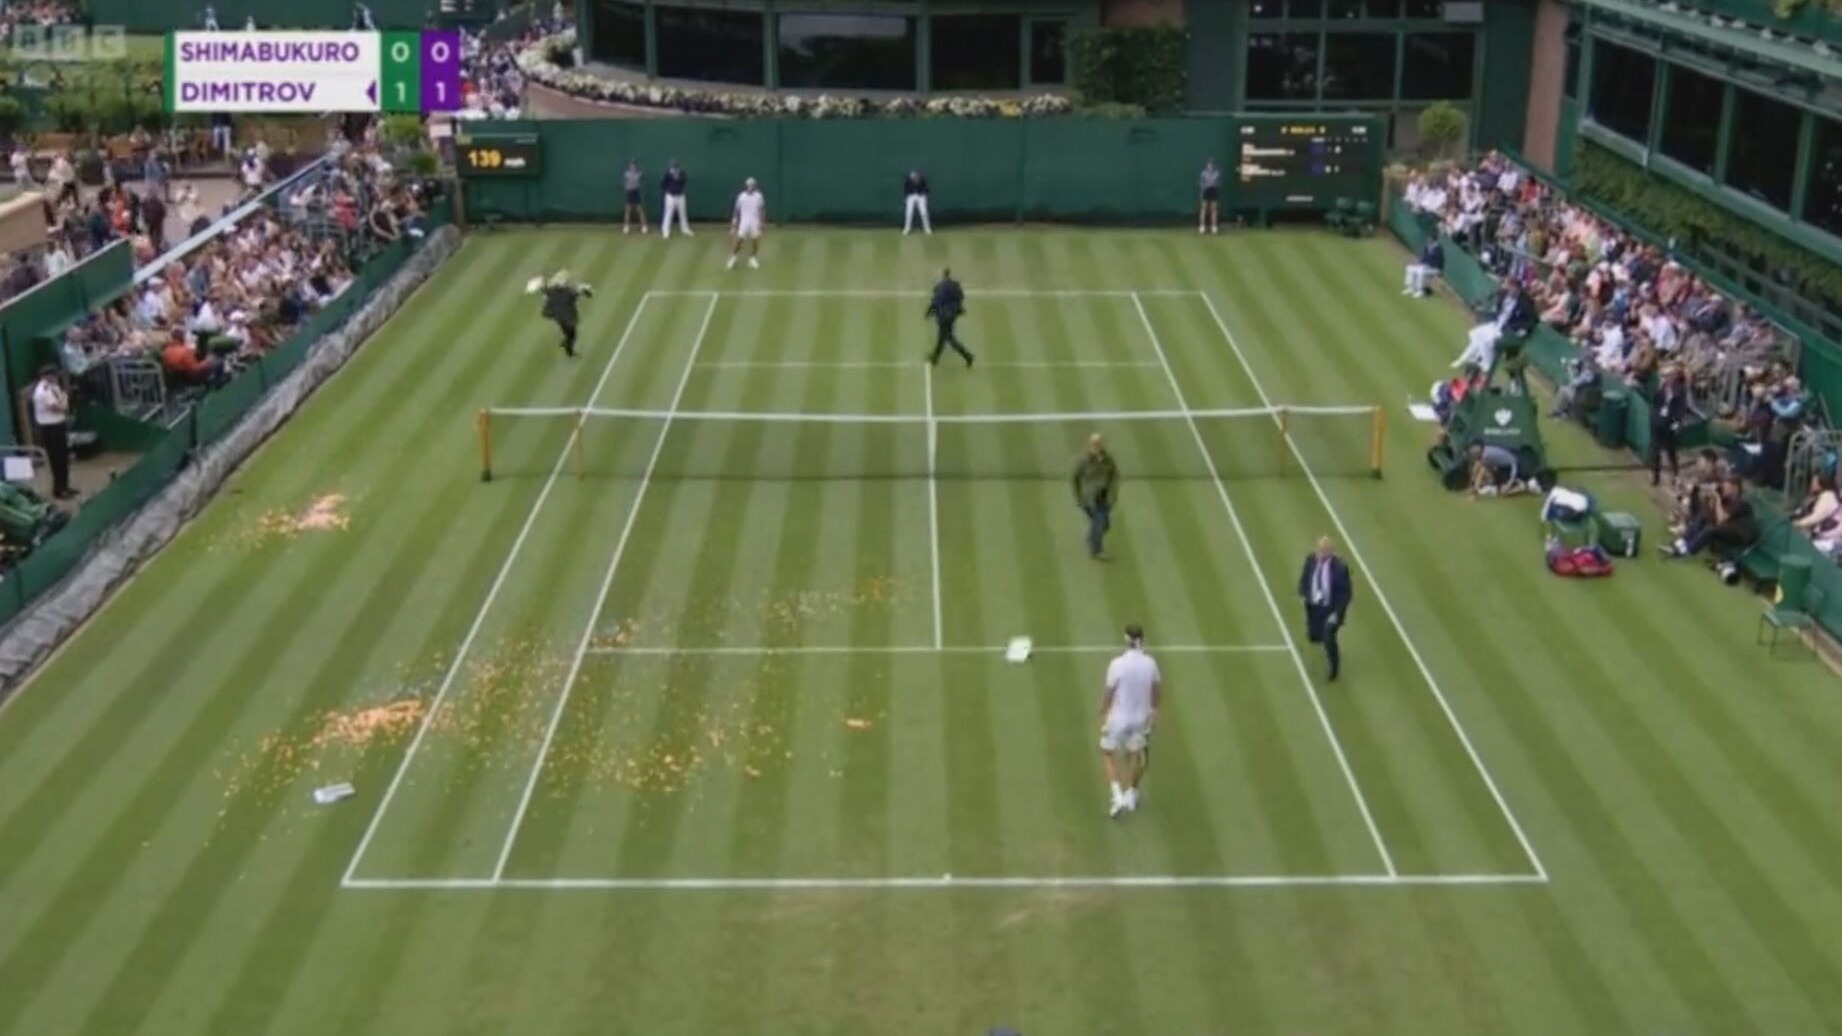 Wimbledon play disrupted twice as Just Stop Oil protesters invade court ITV News London